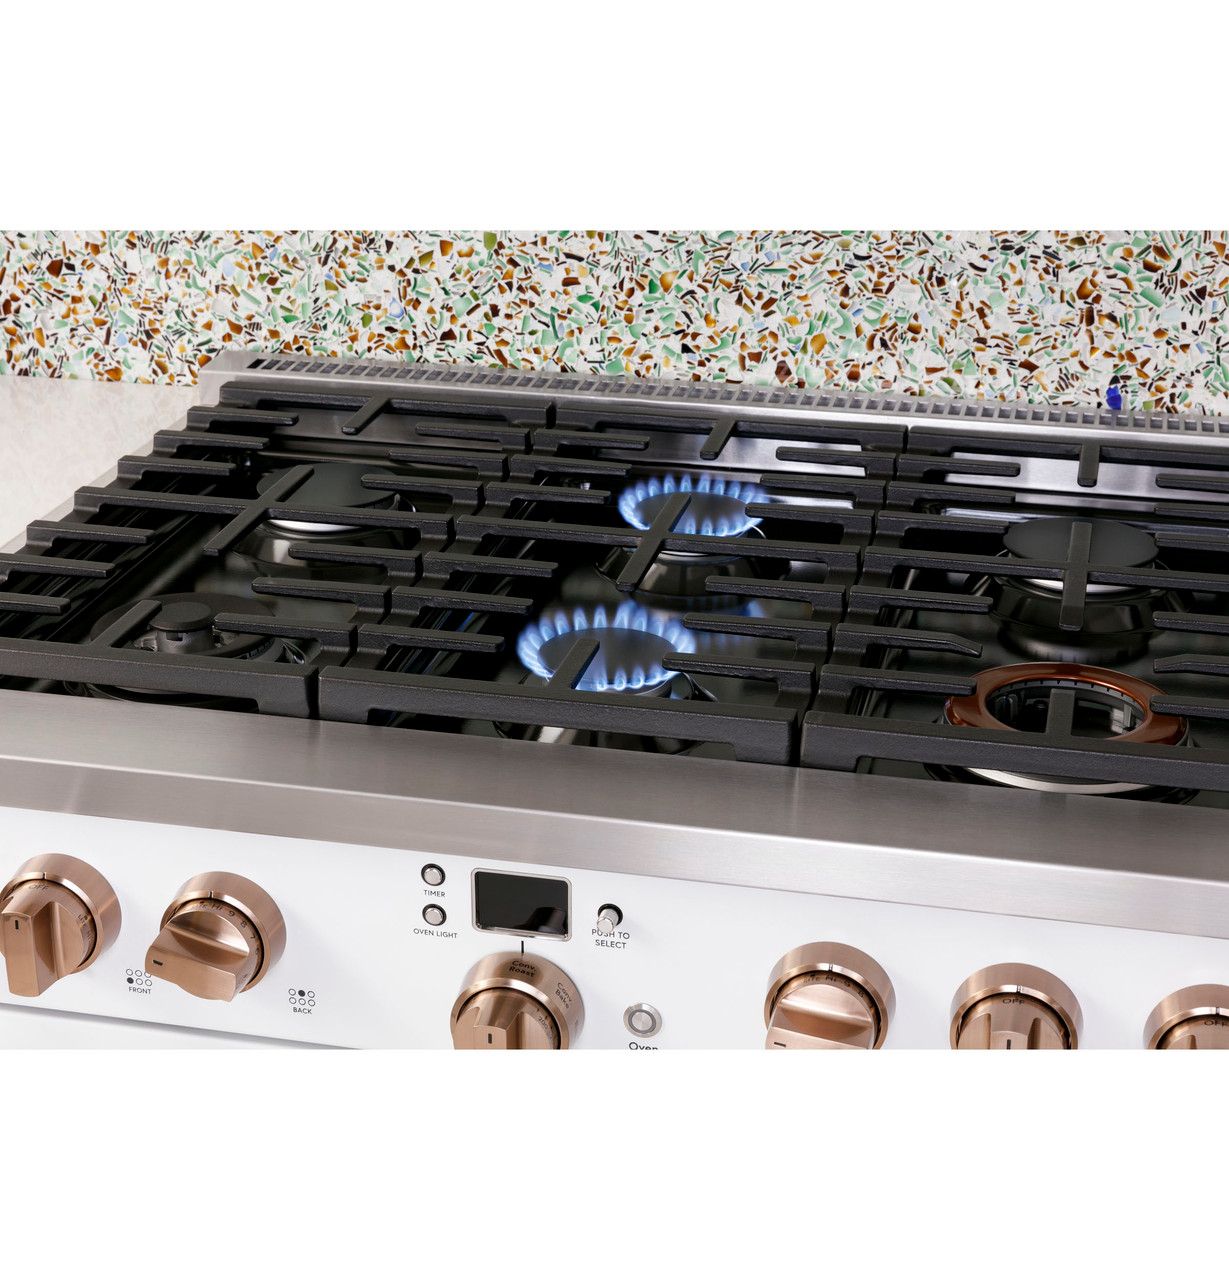 Café™ 36 Commercial-Style Gas Rangetop with 6 Burners (Natural Gas) -  CGU366P2TS1 - Cafe Appliances